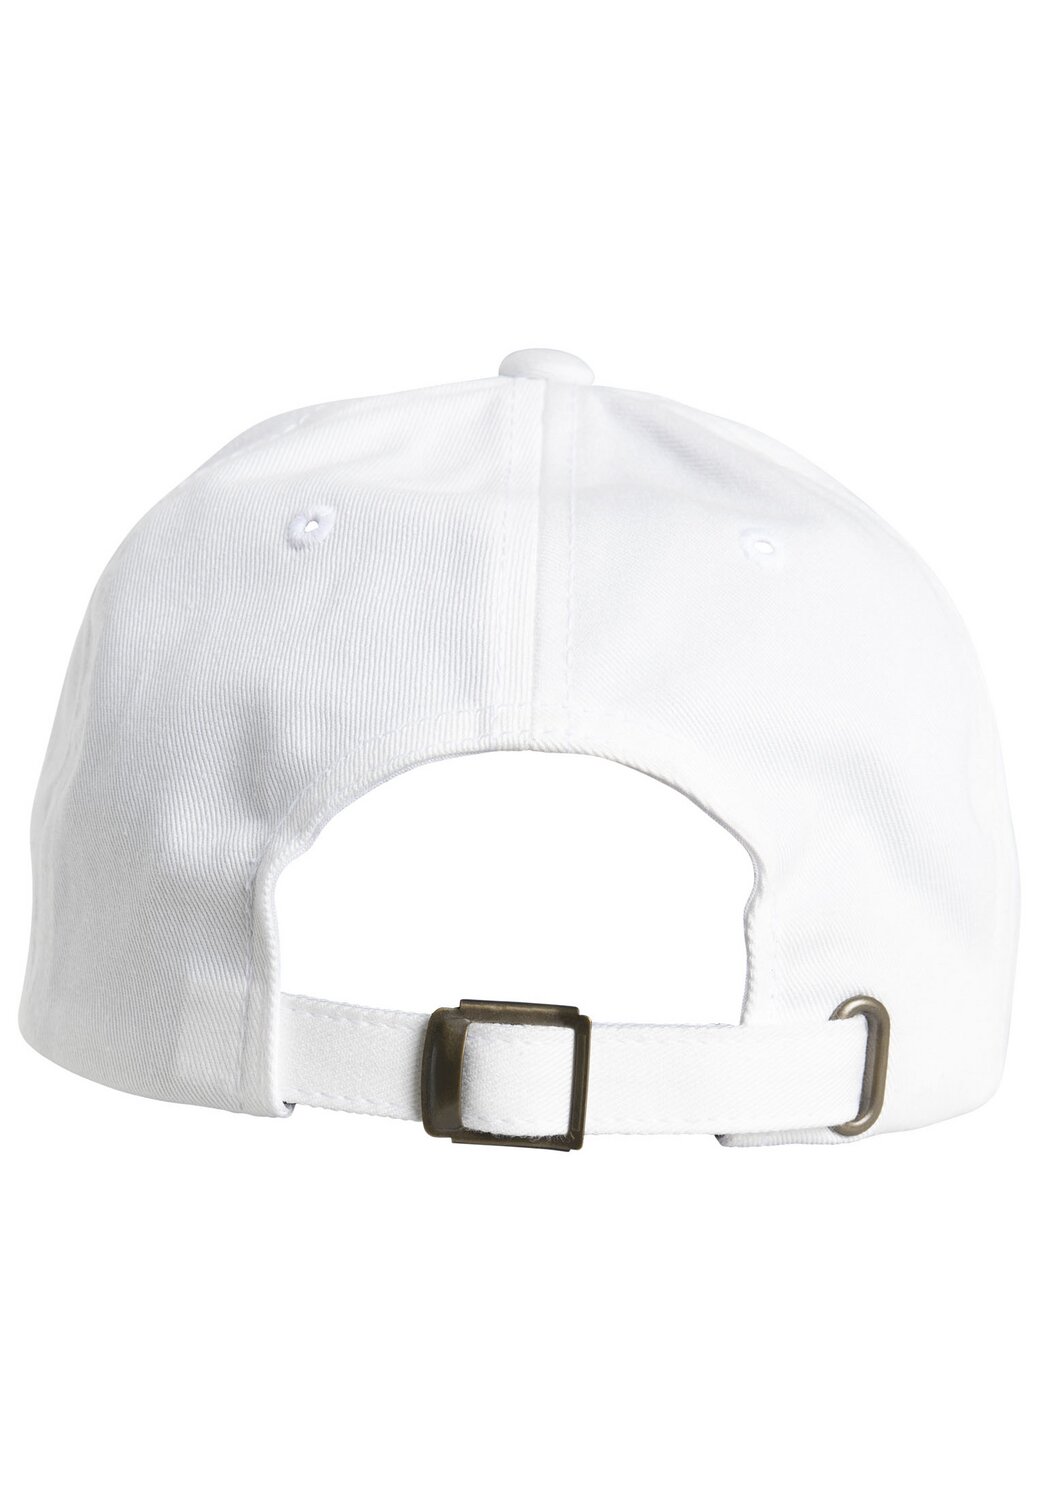 white/fire MAXISCOOT Stripe | red/green Flexfit Hat Dad